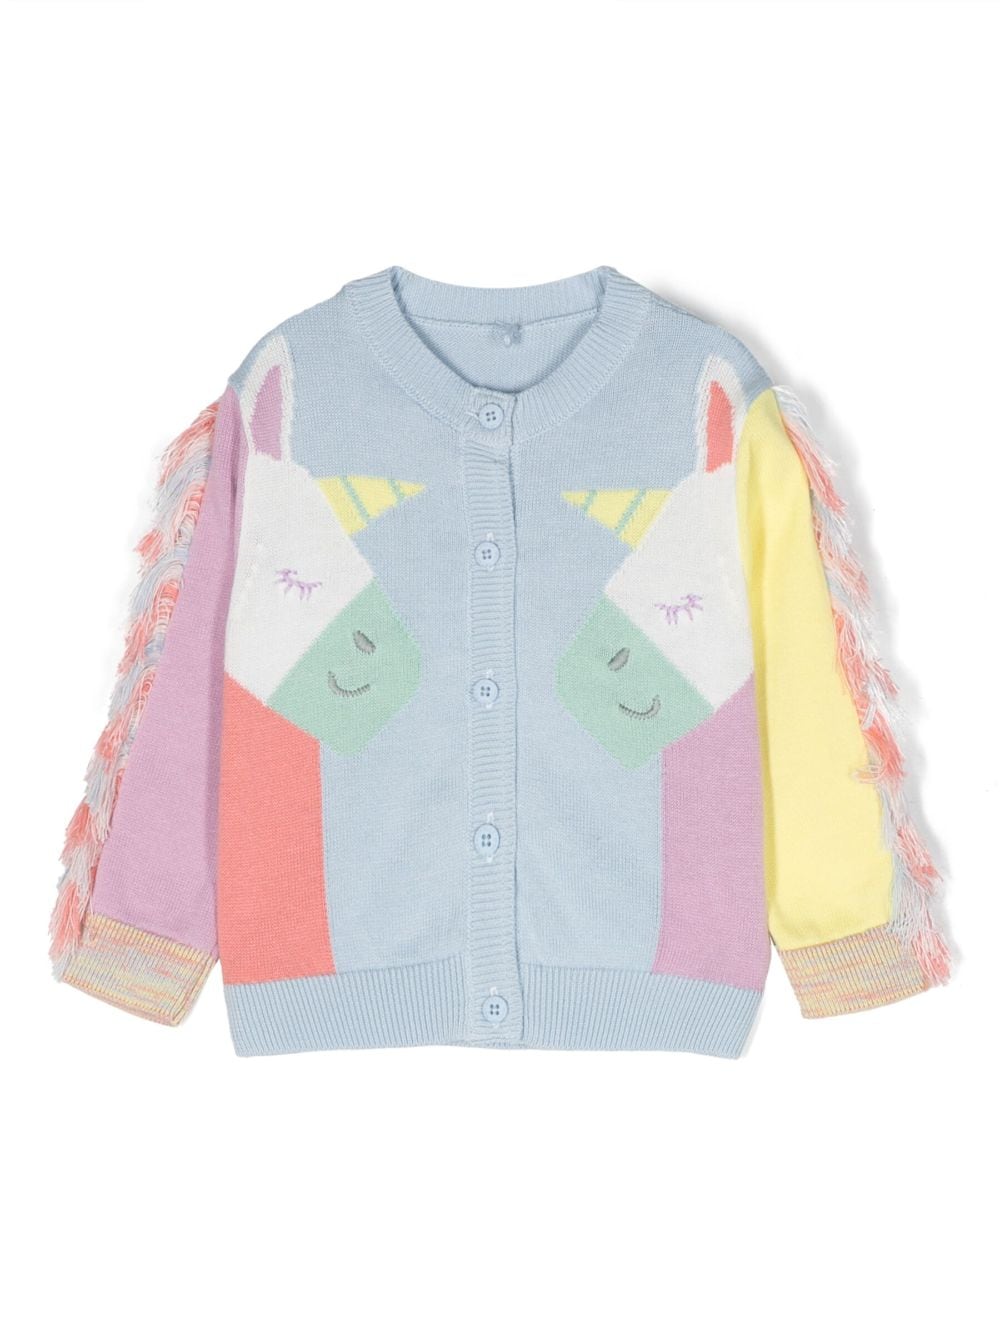 Multicolored cardigan for baby girls